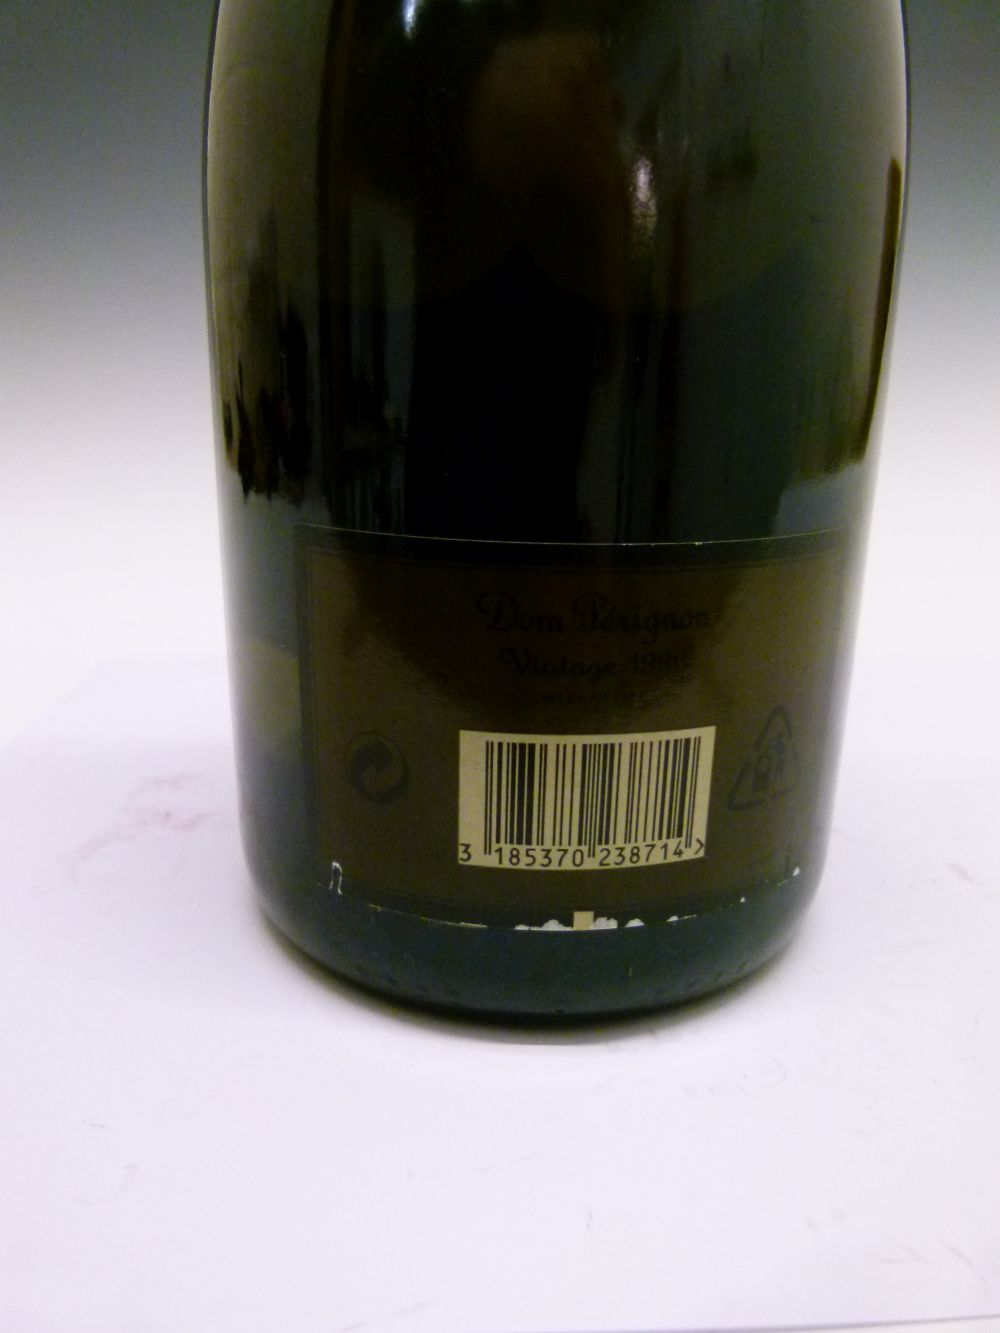 Bottle Dom Perignon Brut Champagne 1996 vintage (1) Condition: Level and seal is good, minor wear to - Image 4 of 7